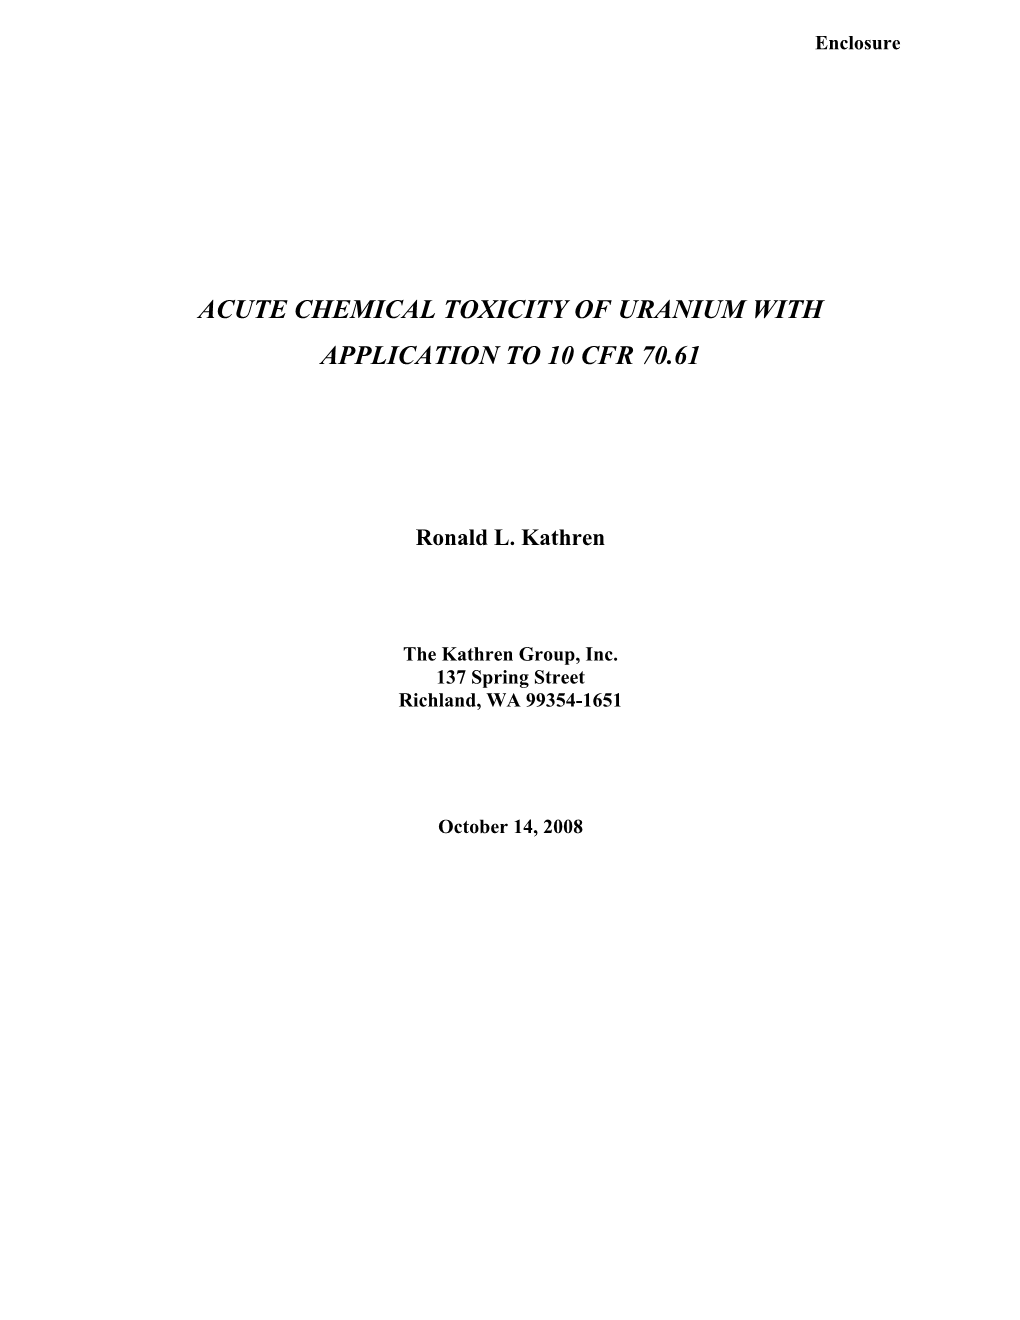 Acute Chemical Toxicity of Uranium with Application to 10 CFR 70.61